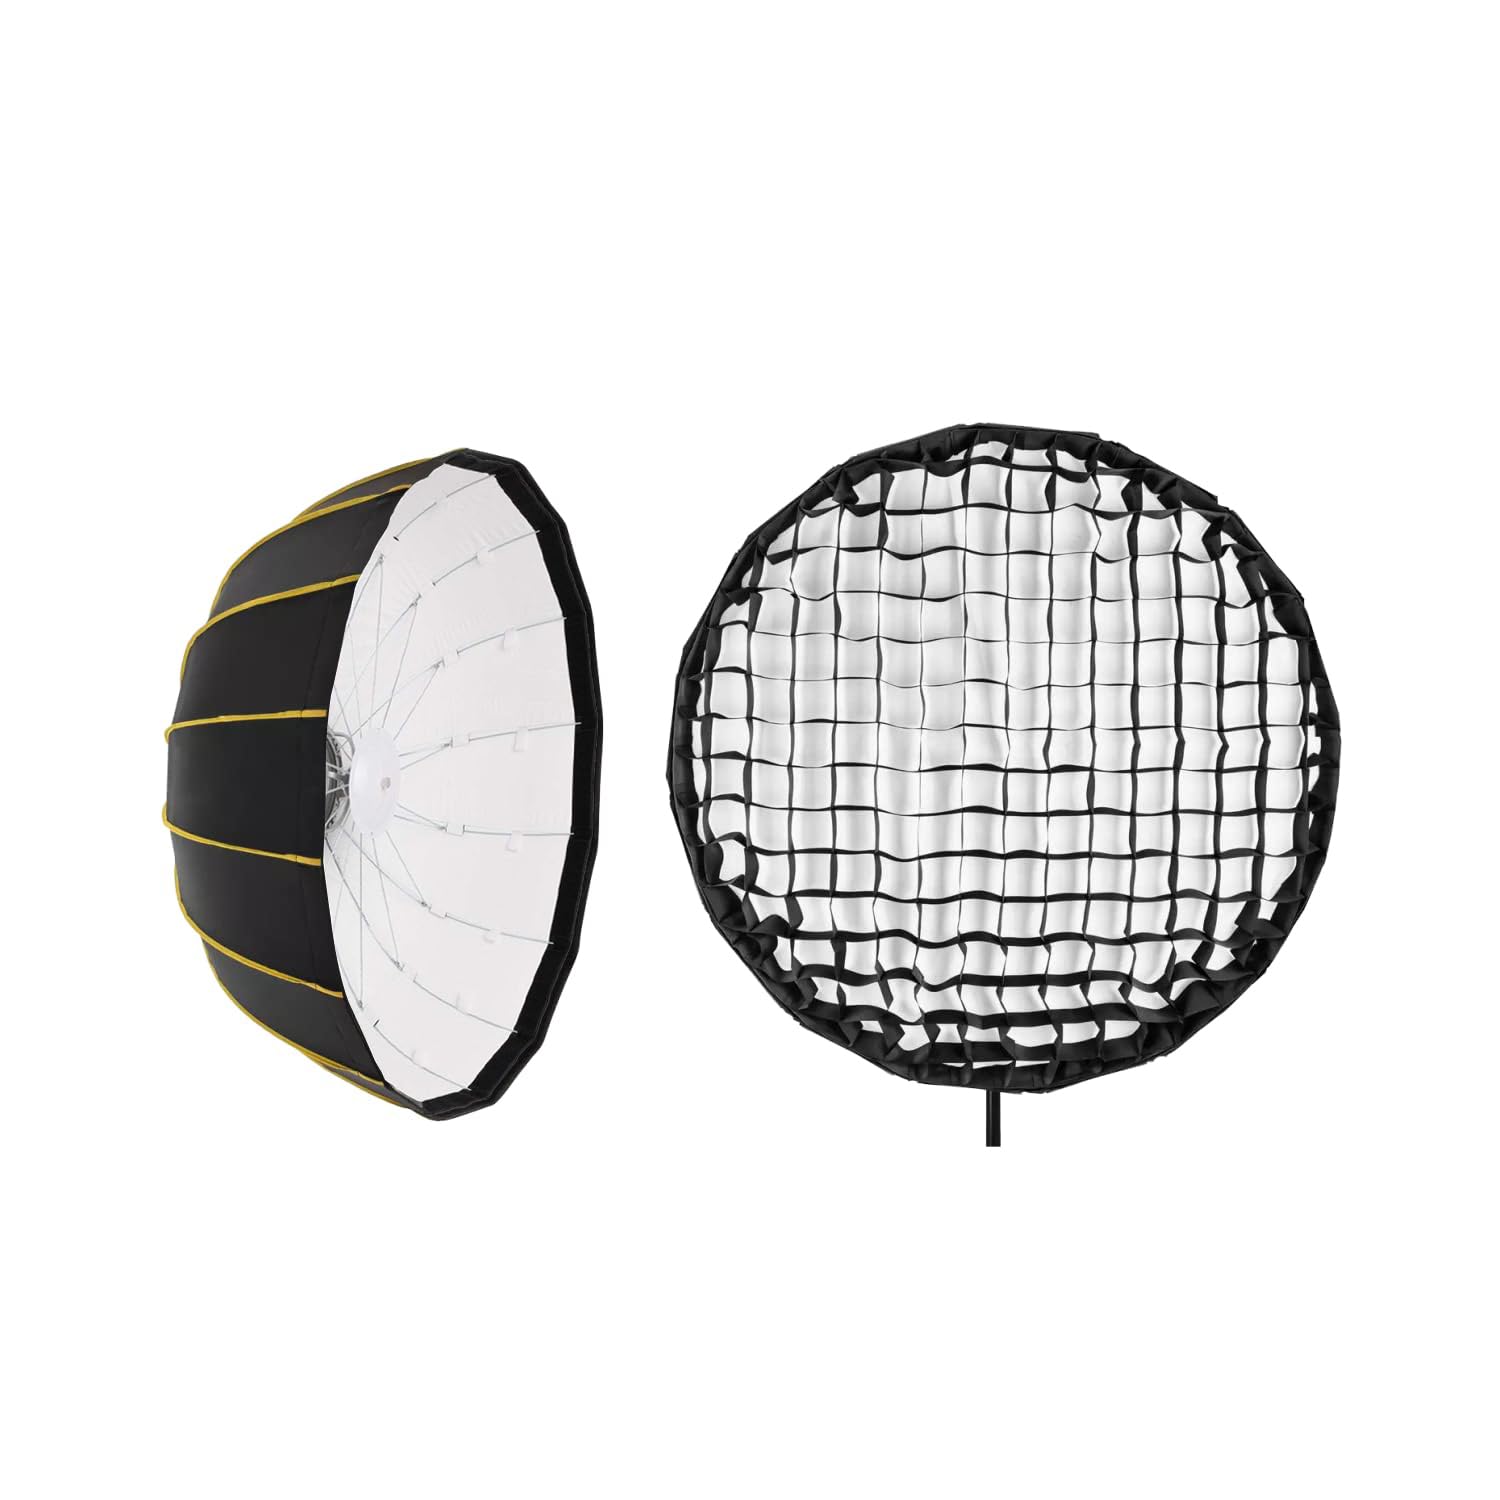 Digitek DBDS-105W 105cm Beauty Dish Softbox (White), Collapsible, Transportable, Lightweight Bowen Mount for Photography & Studio Lighting with Removable Diffuser